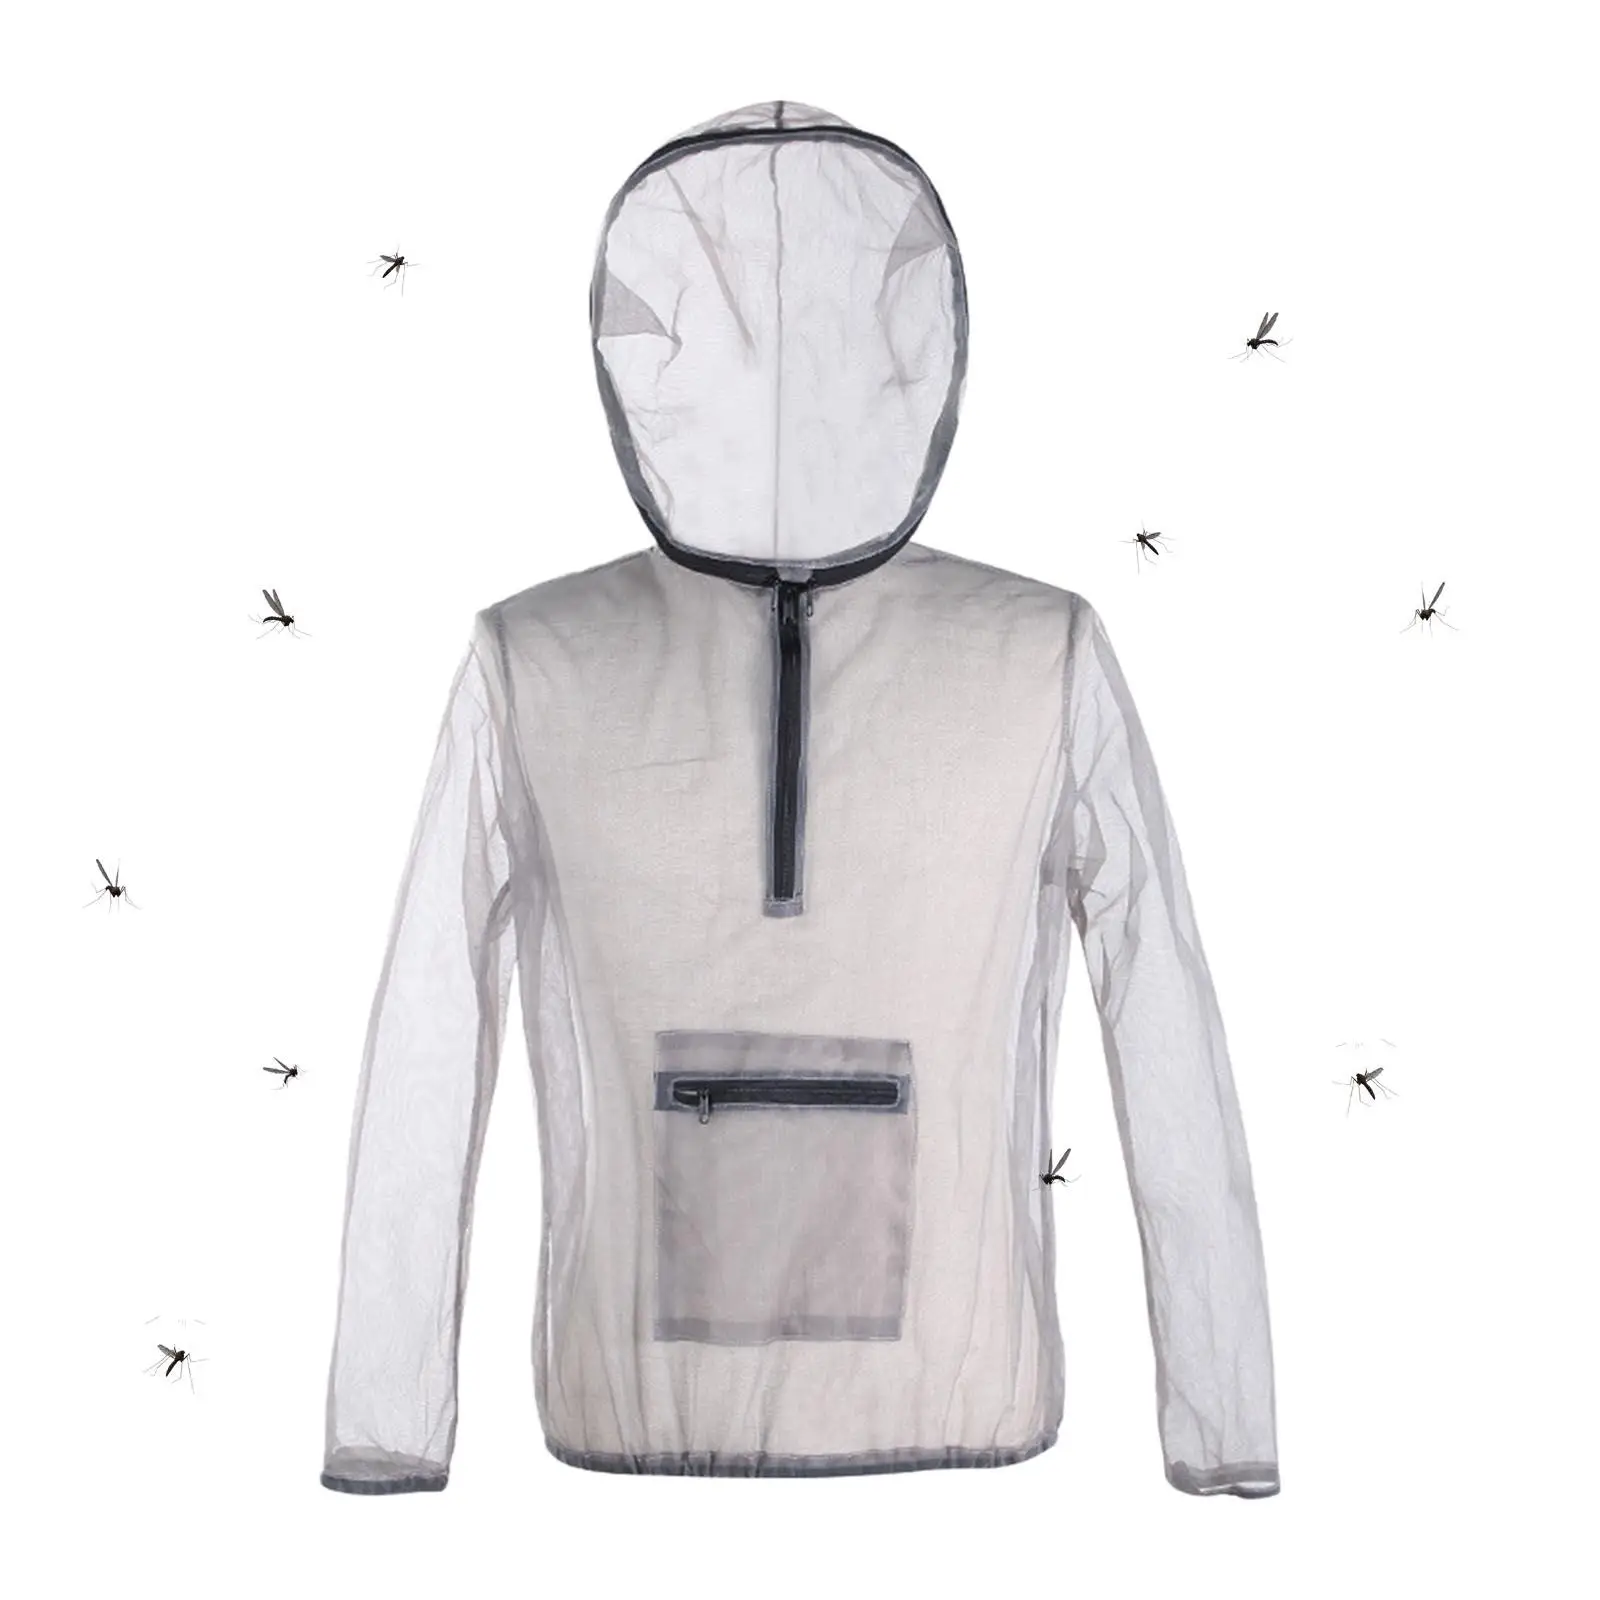 Beekeeping Jacket Protection Bee Keeping Suit for Climbing Outdoor